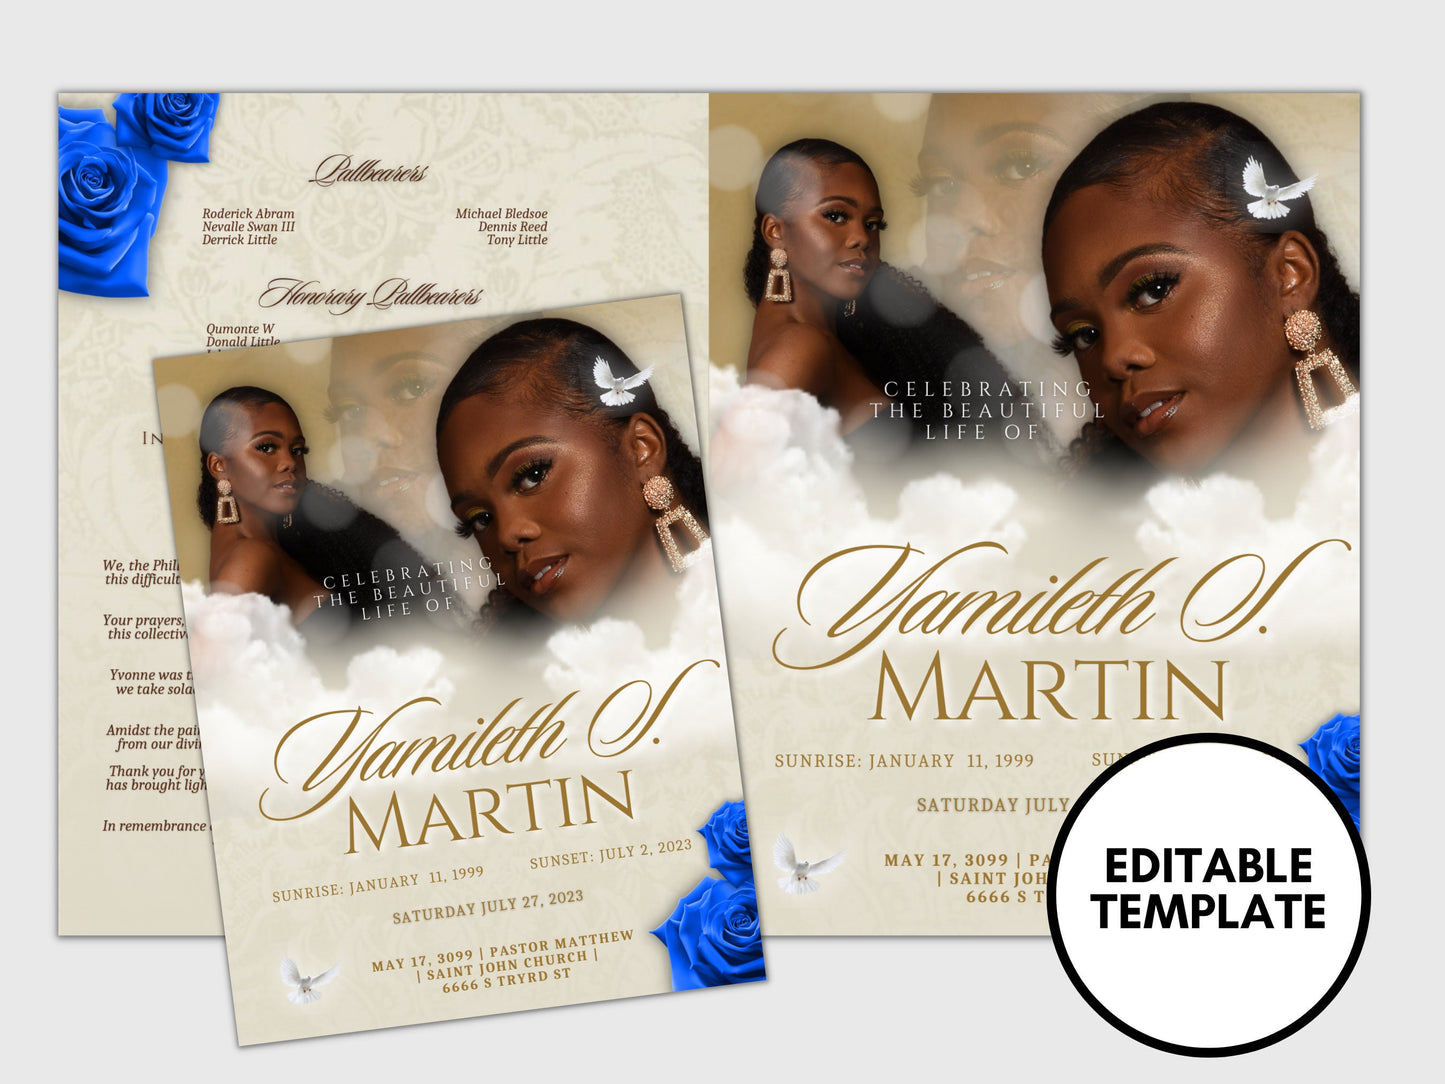 8.5"x11" BOOKLET Memorial program (4 pages)| CREME with pop of BLUE Style Funeral Program |Digital Download |Celebration of life